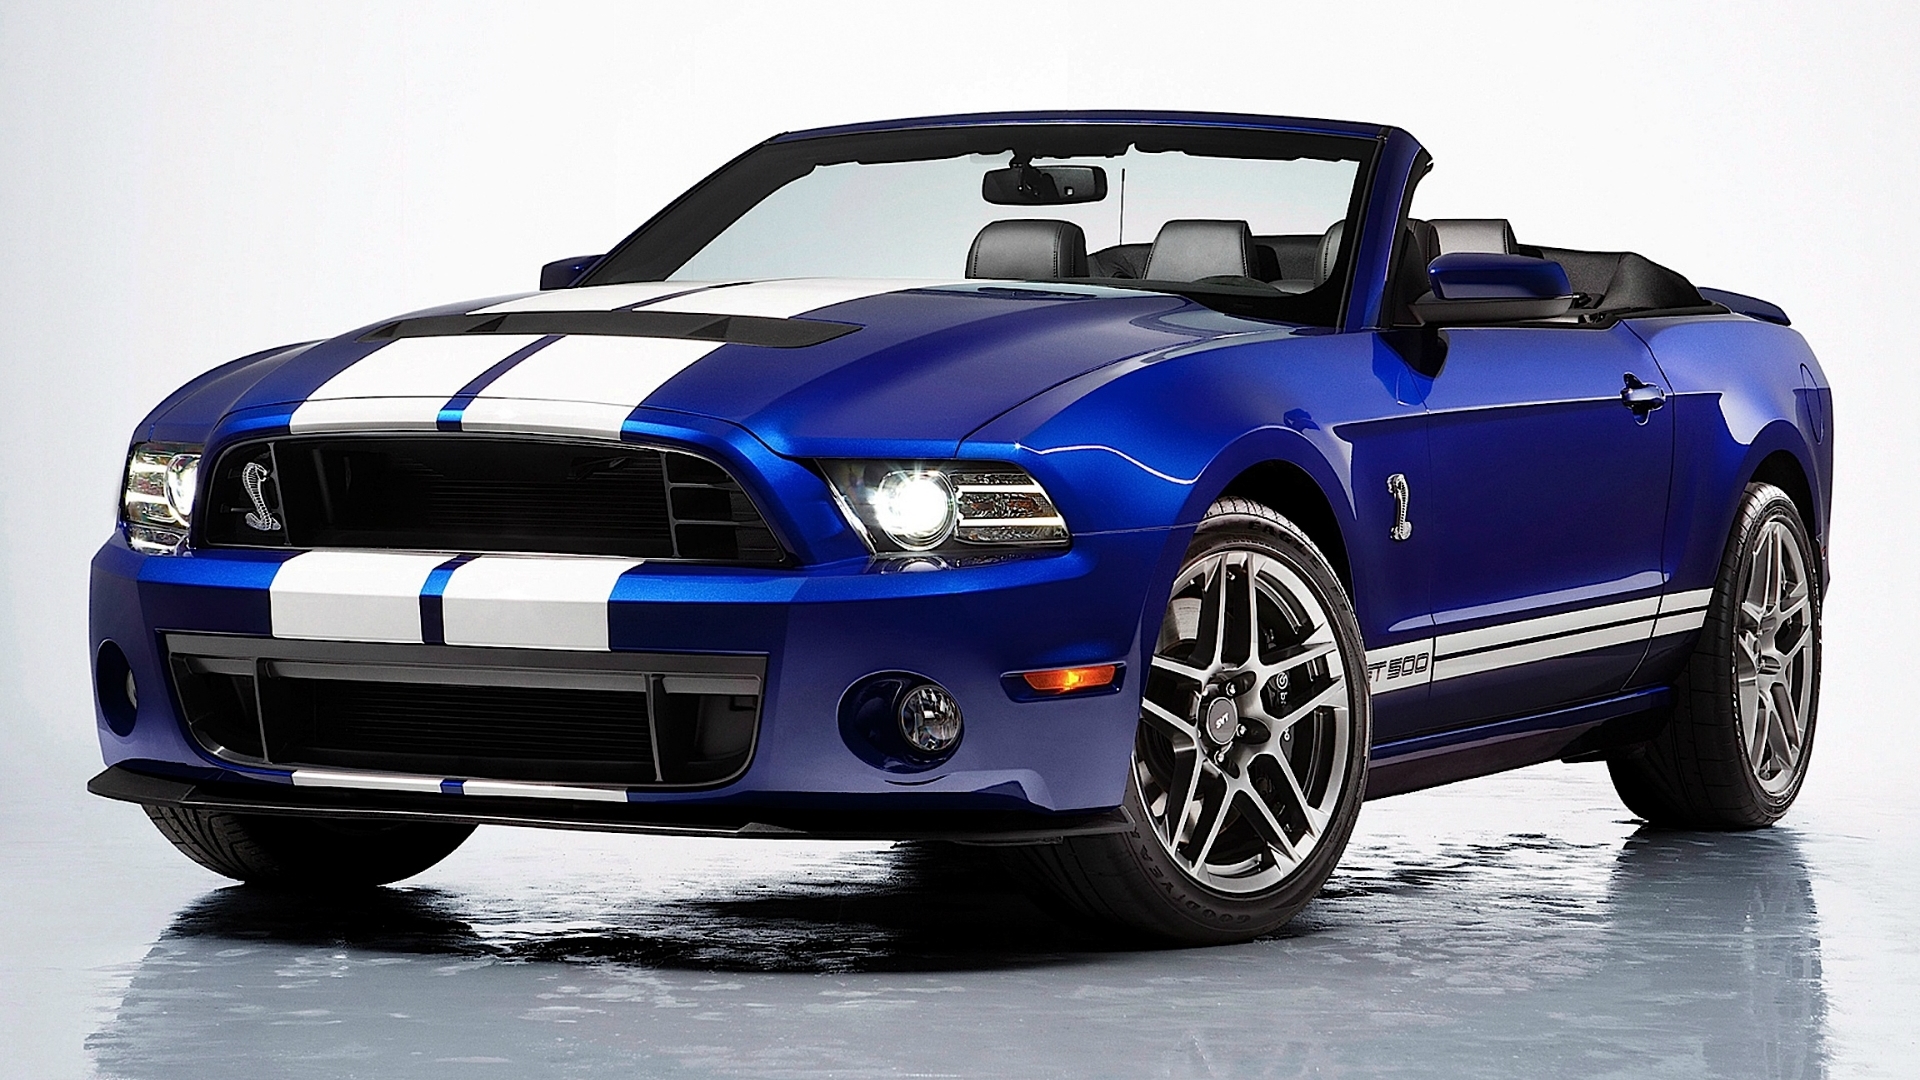 Ford Mustang Shelby Wallpaper S High Resolution Image